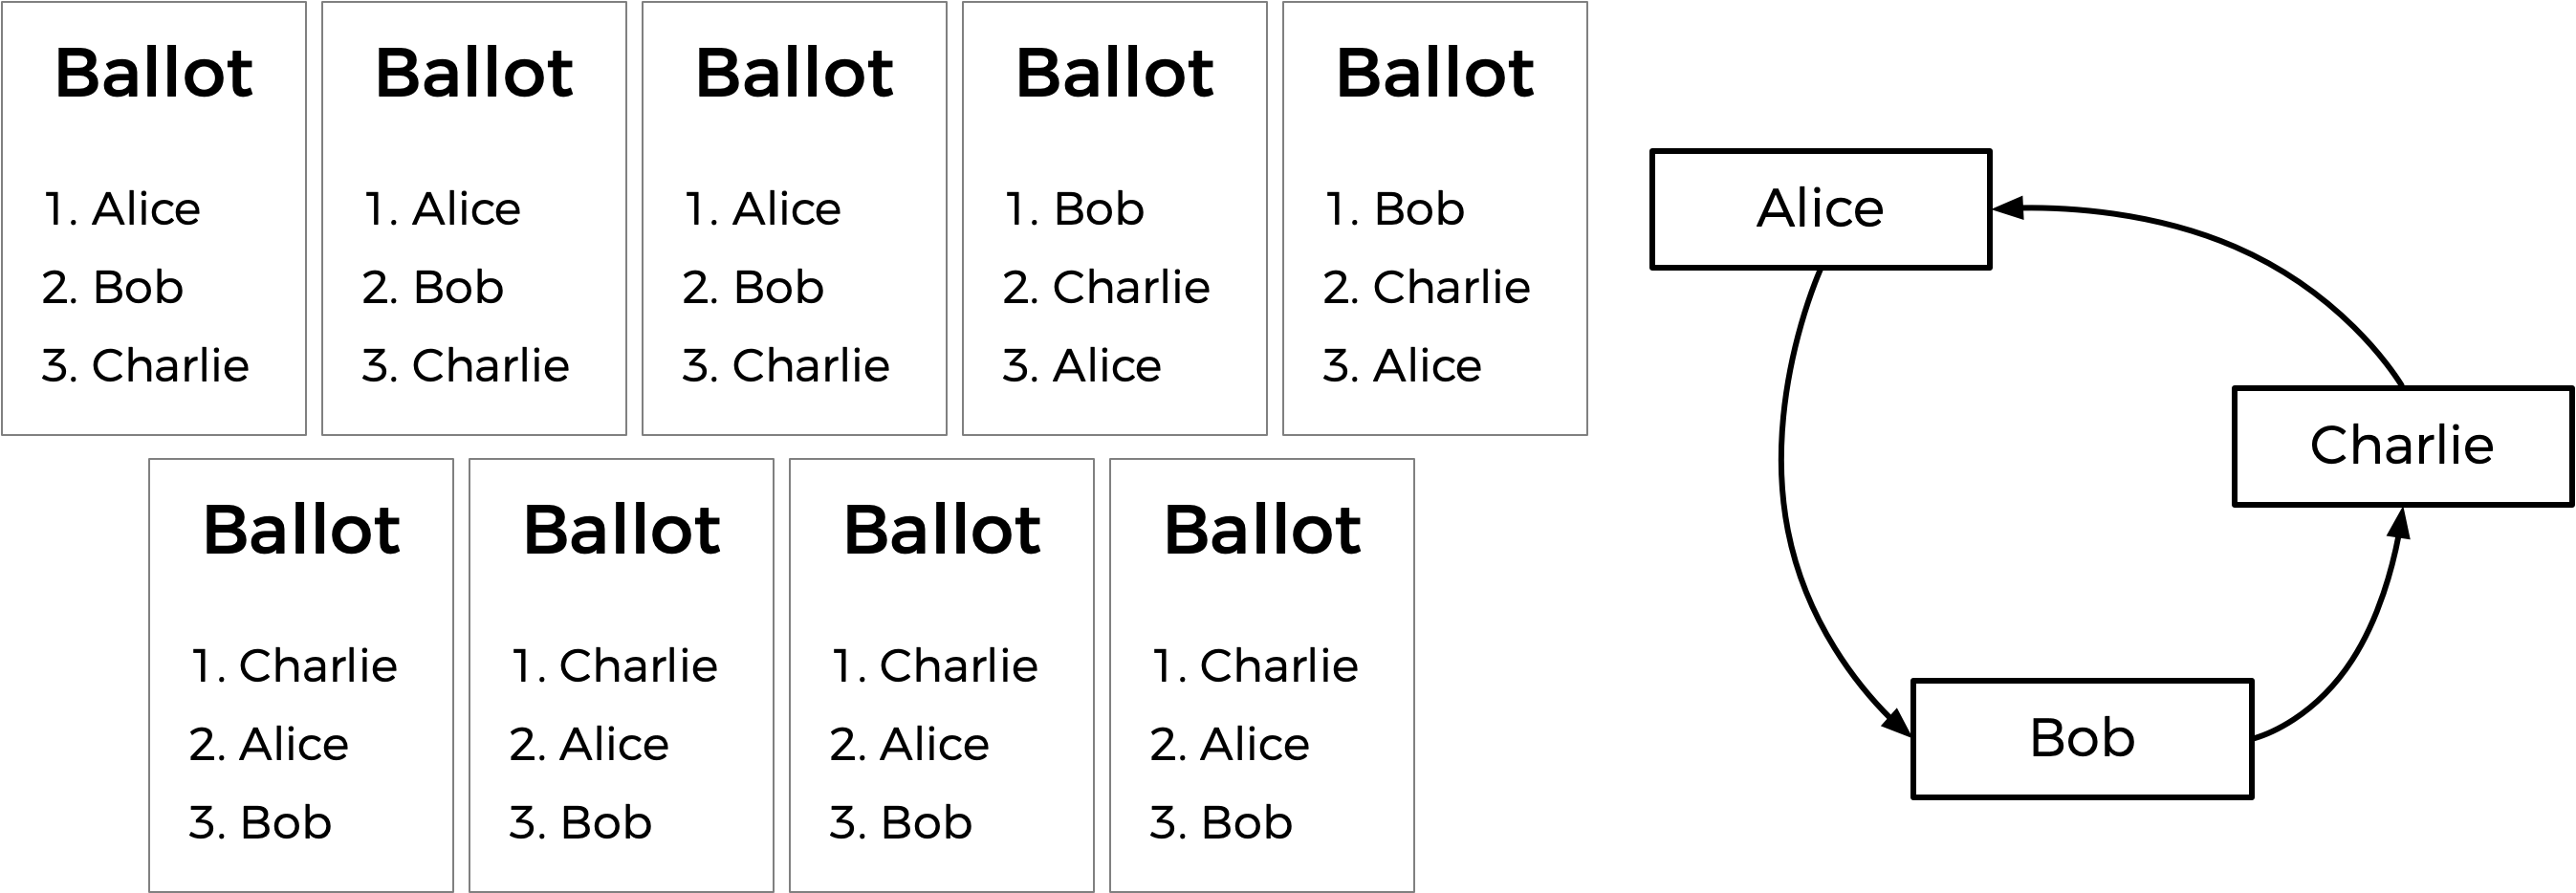 Nine ballots, with ranked preferences